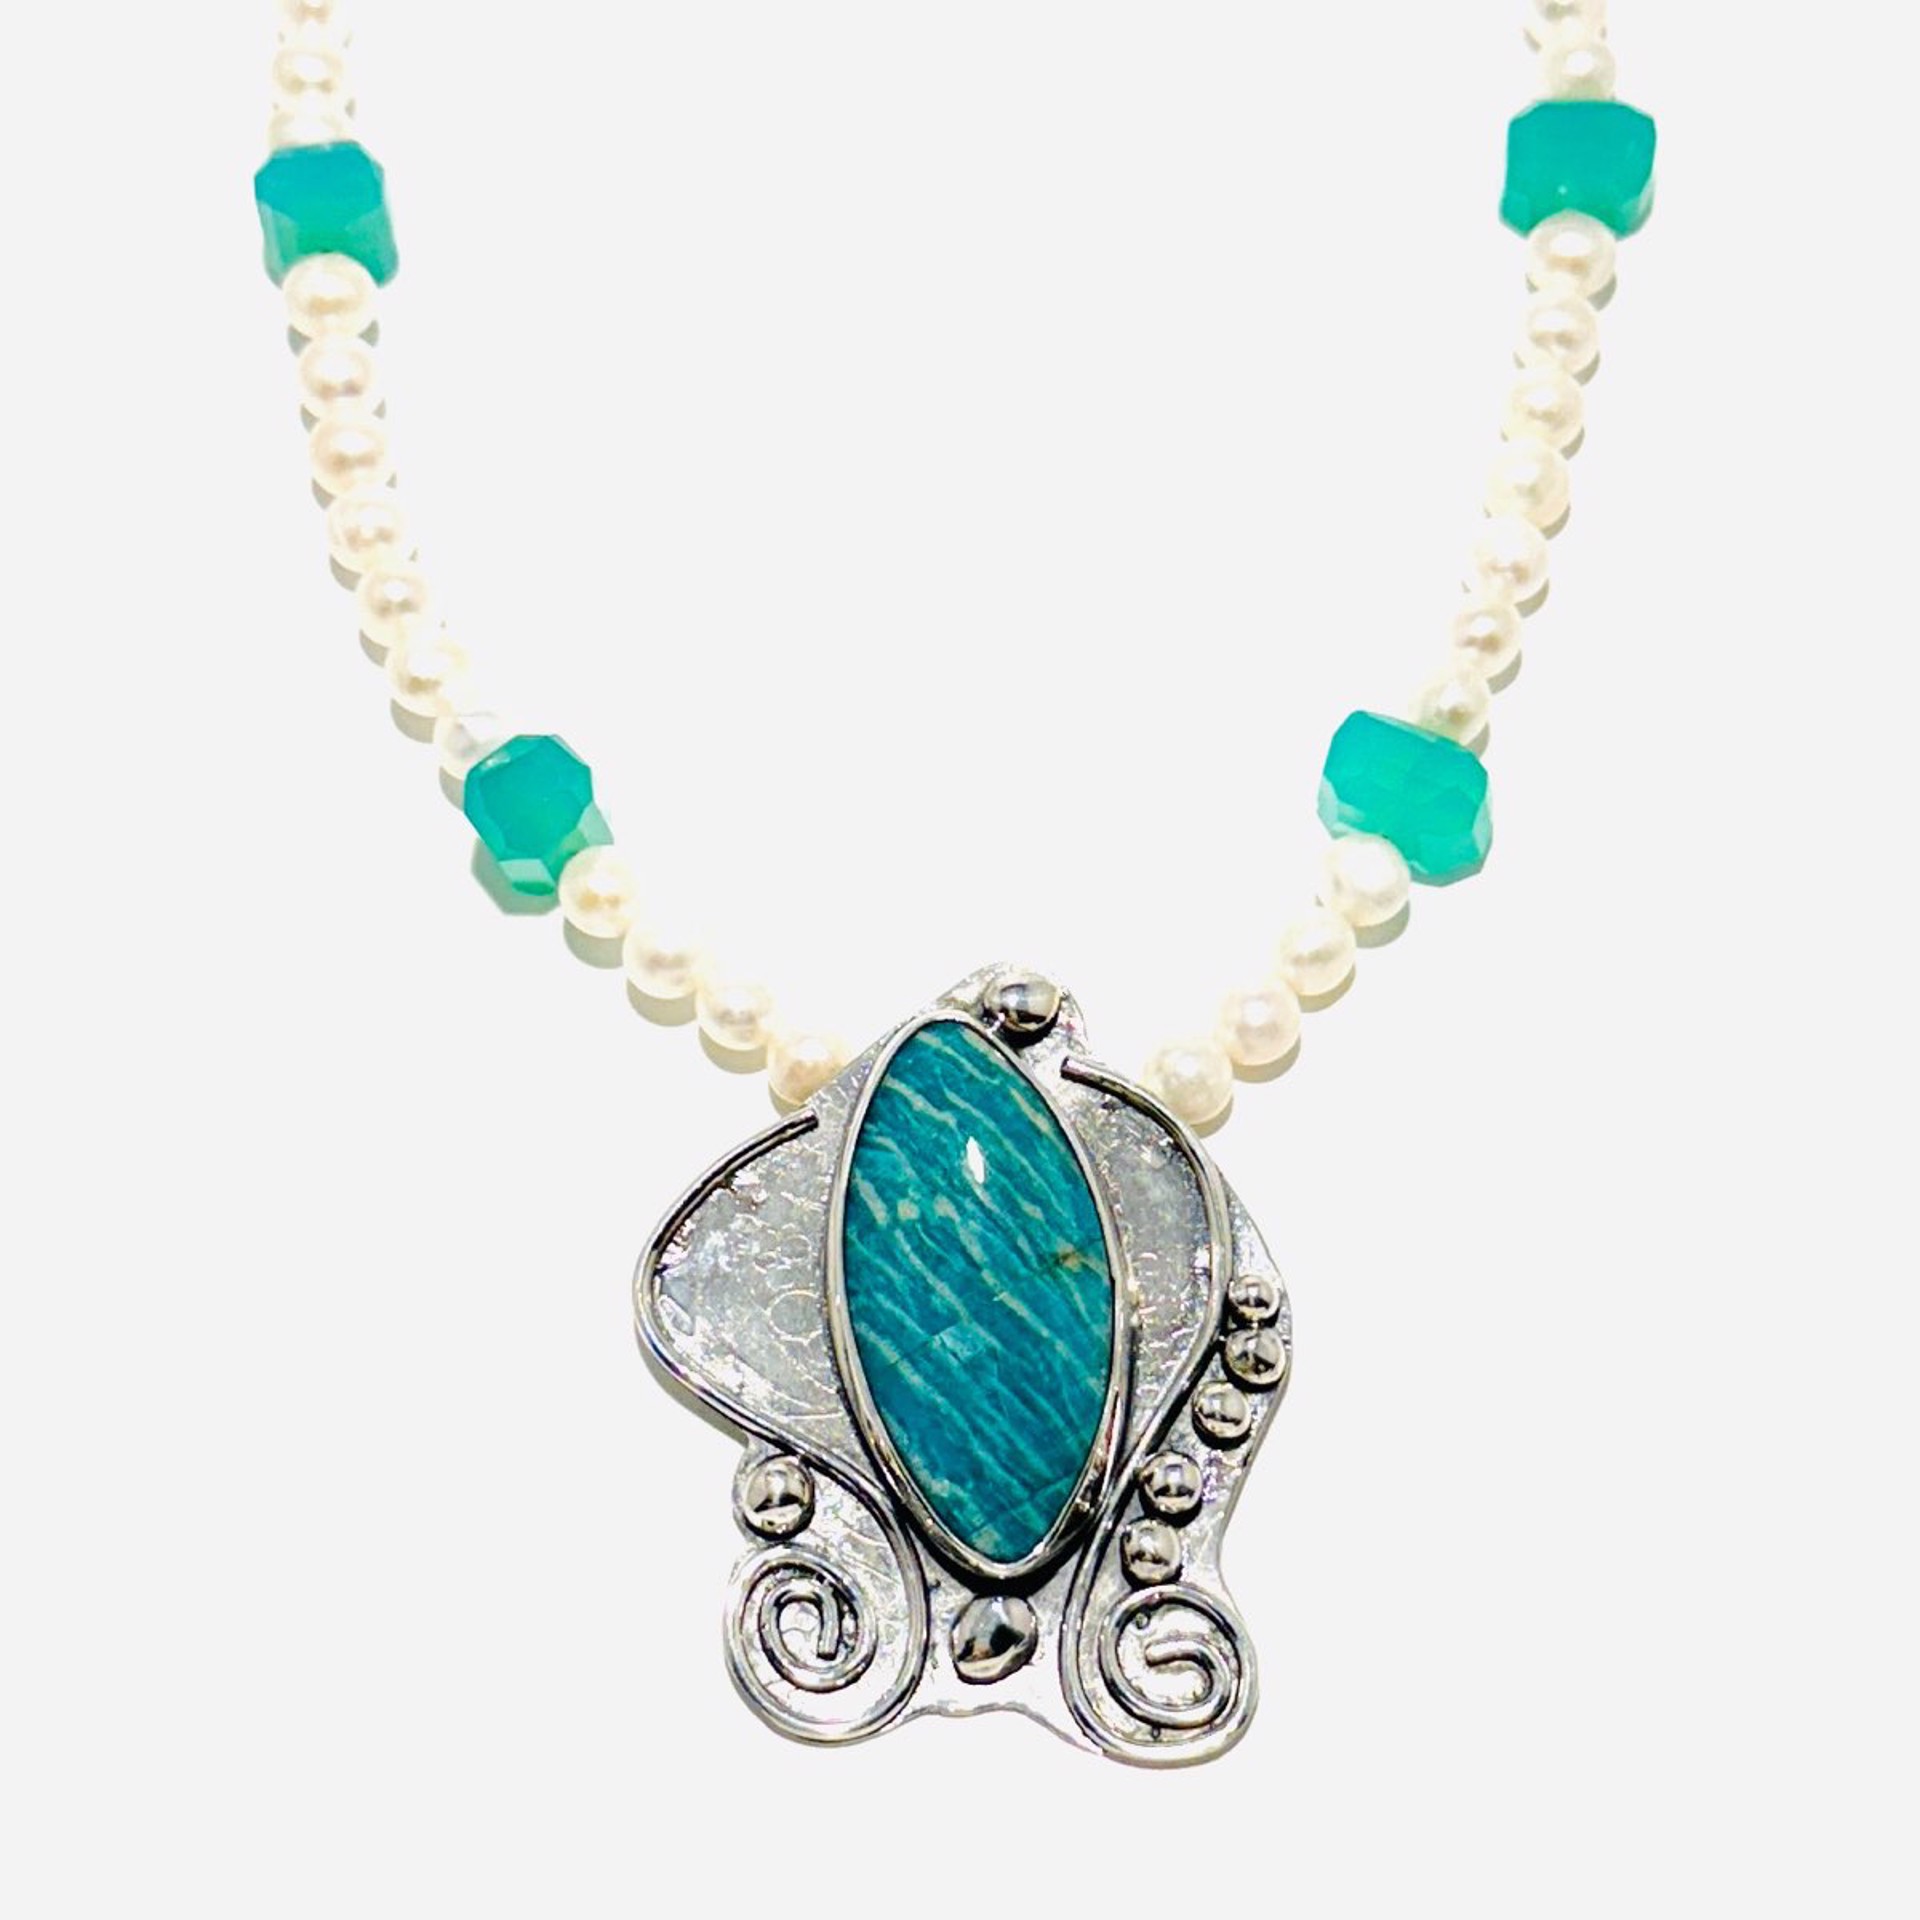 Oval Russian Amazonite on Large Sterling Focal, Pearl, Chrysoprase Necklace AB23-125 by Anne Bivens